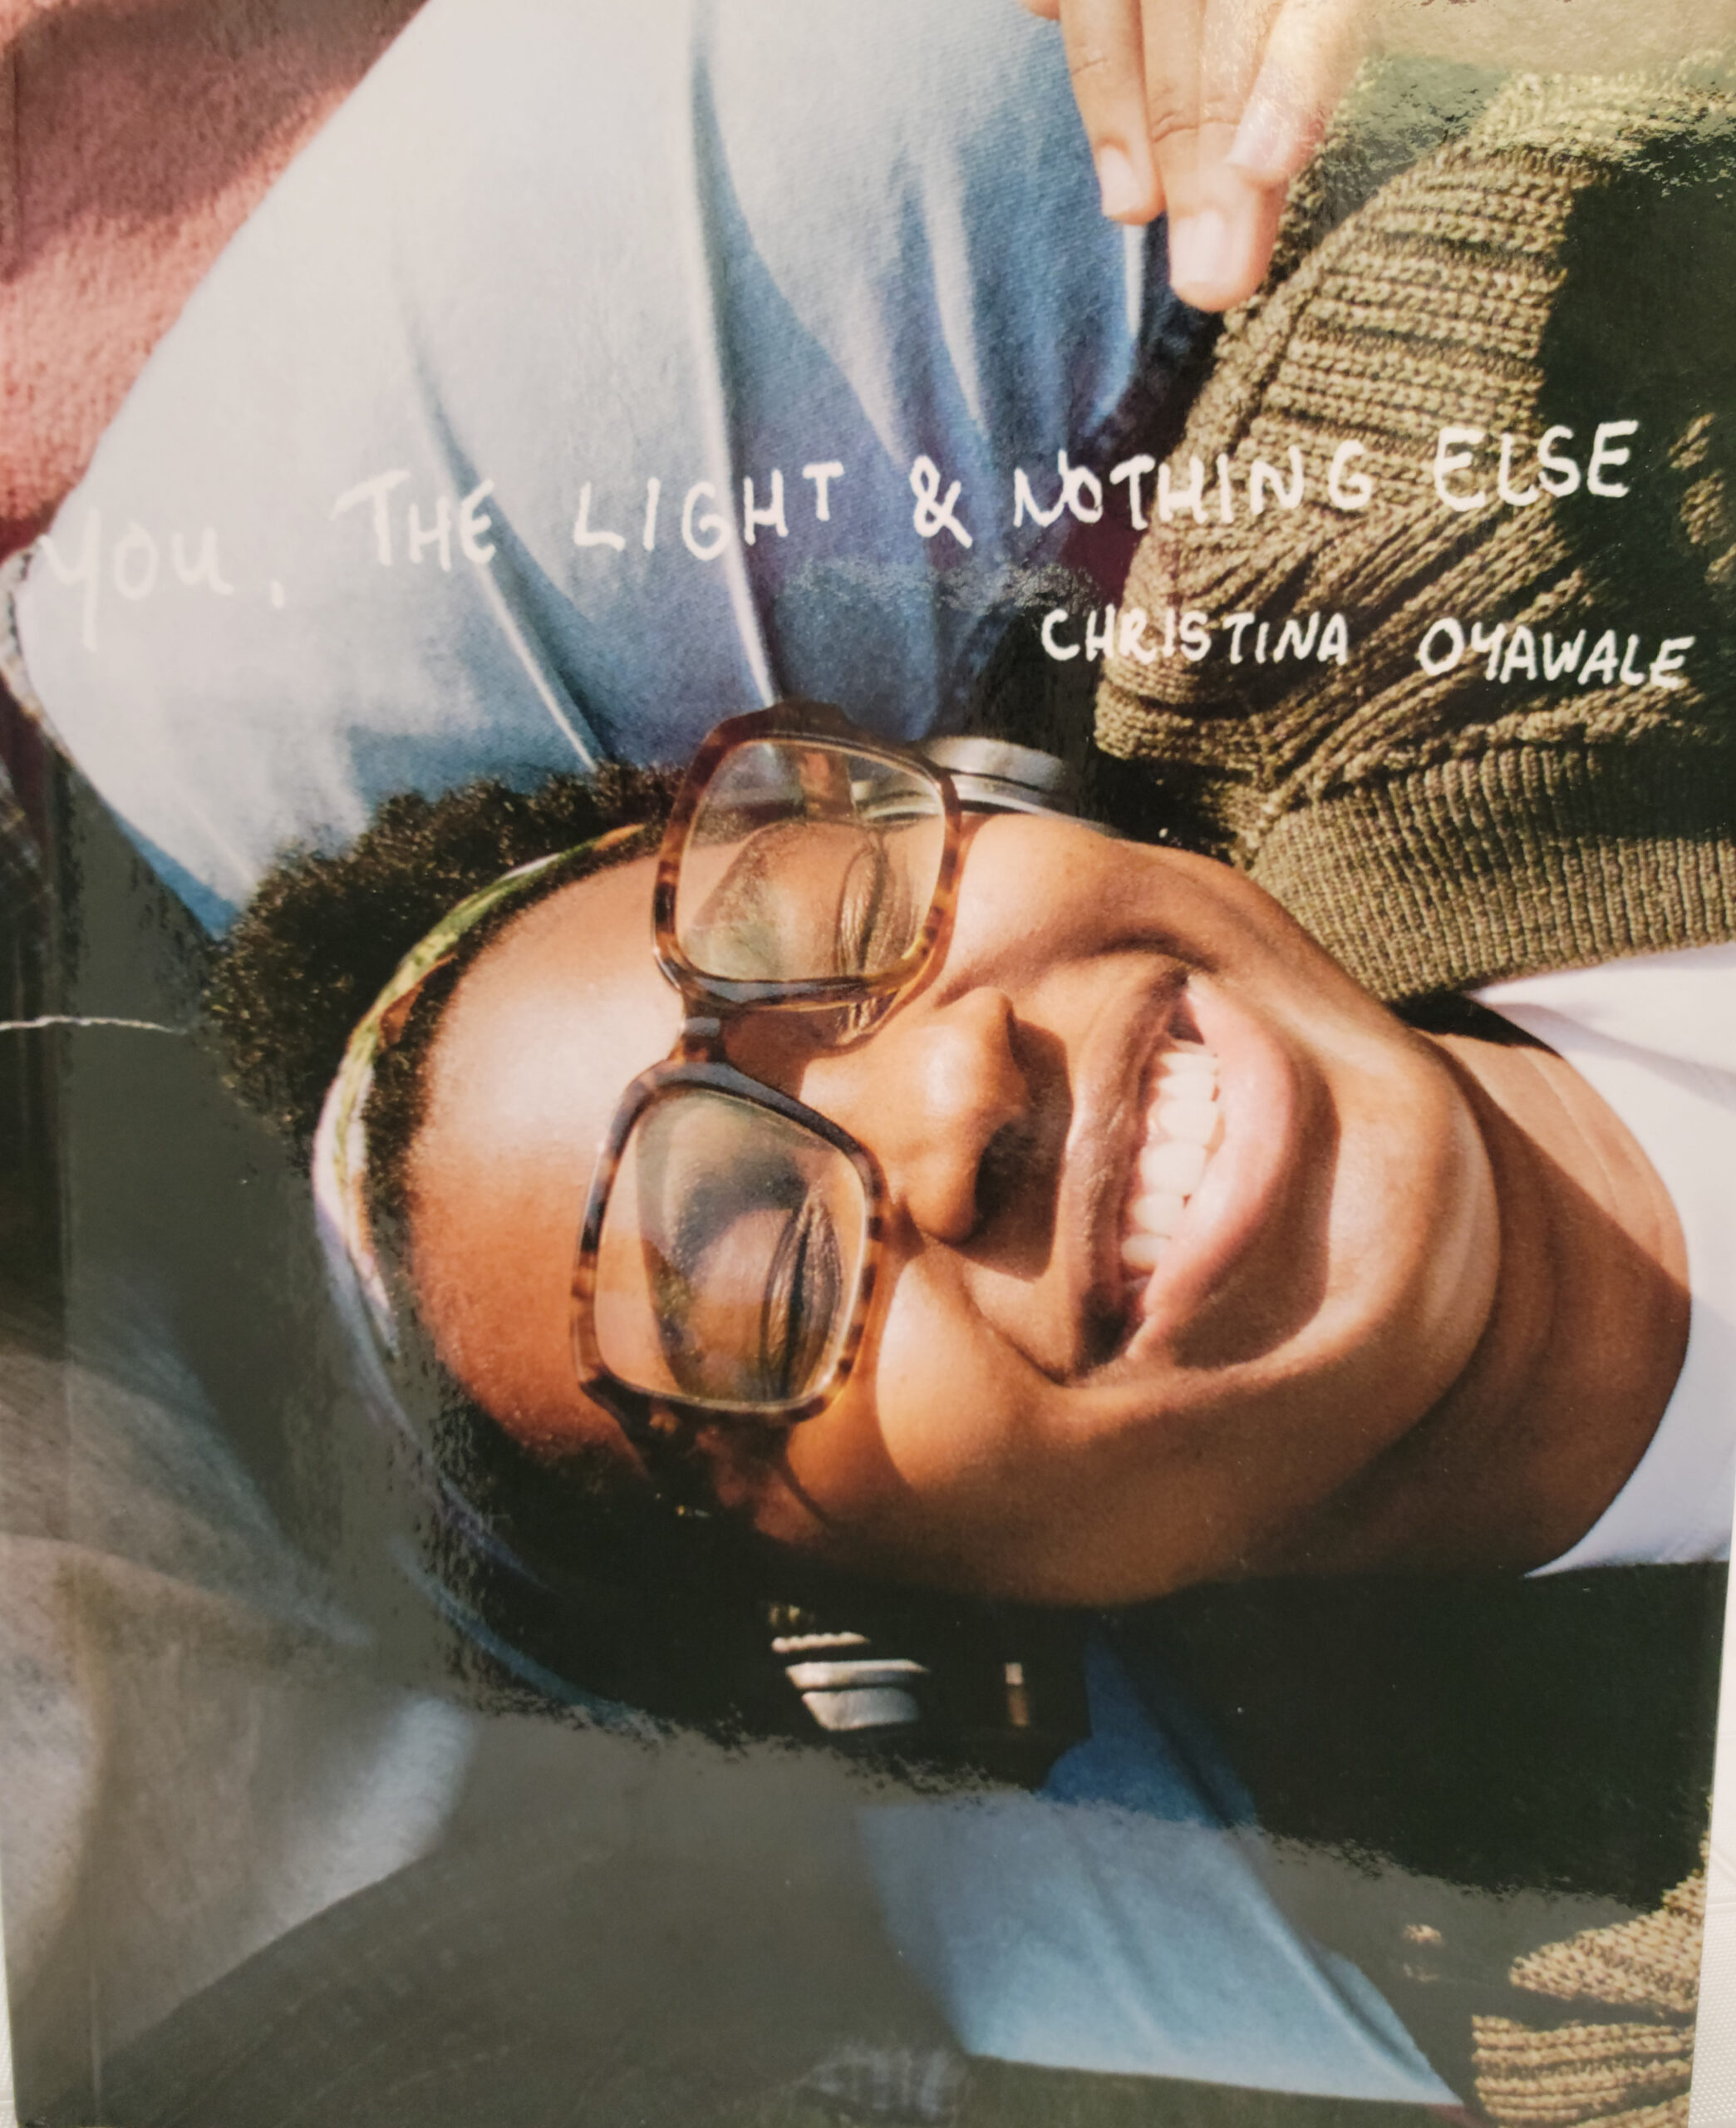 Photograph of front cover of book You, the light & nothing else by Christina Oyawale